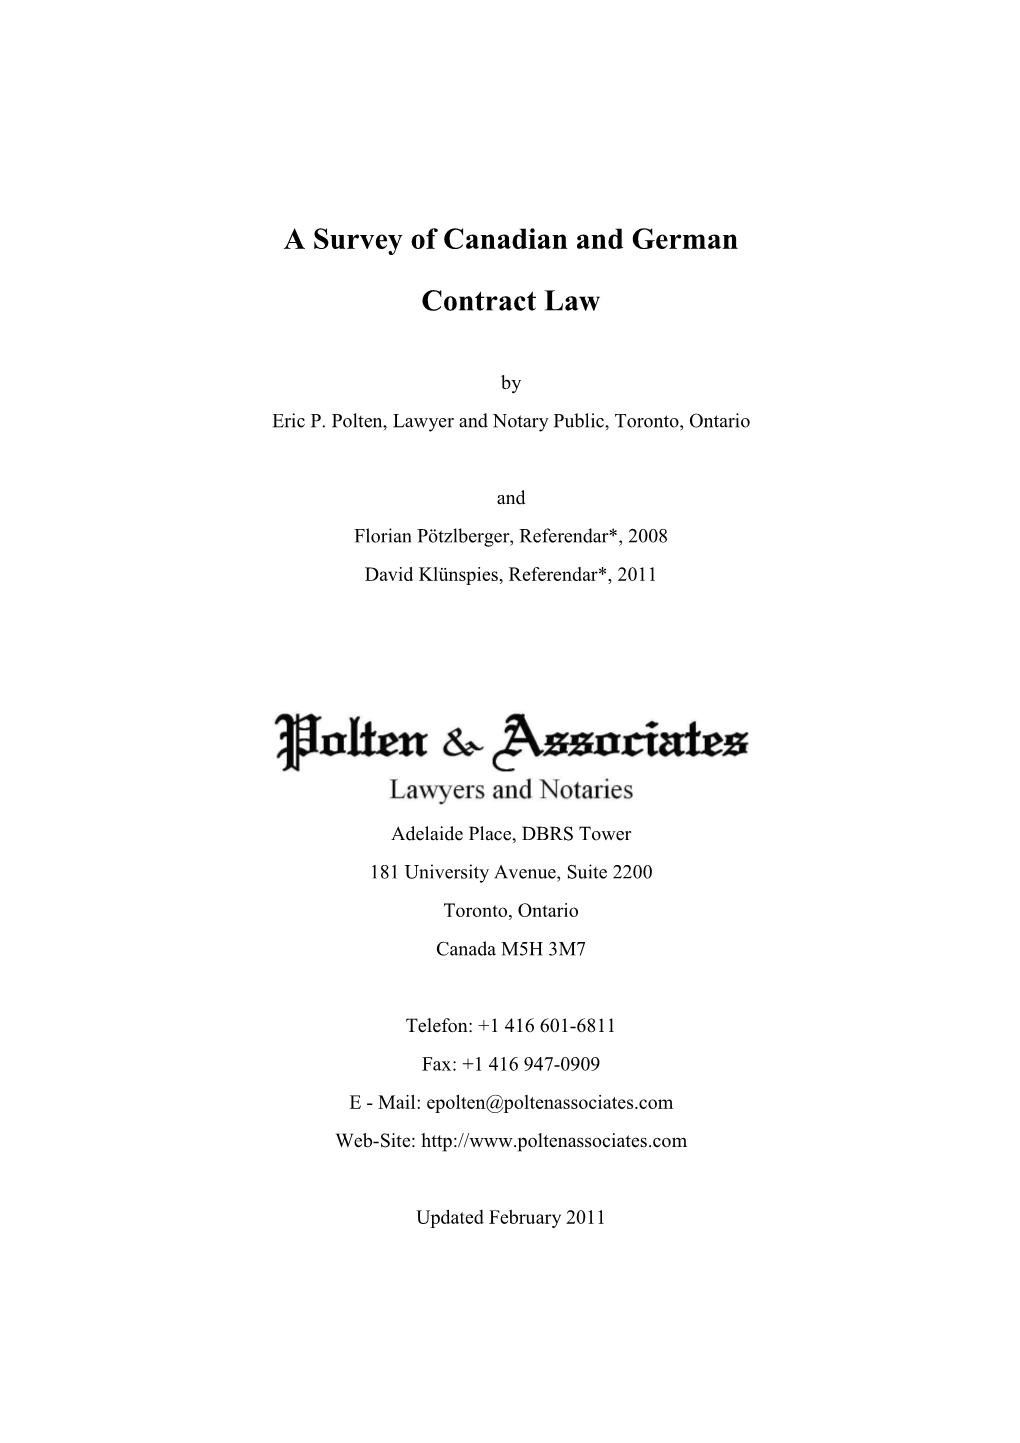 A Survey of Canadian and German Contract